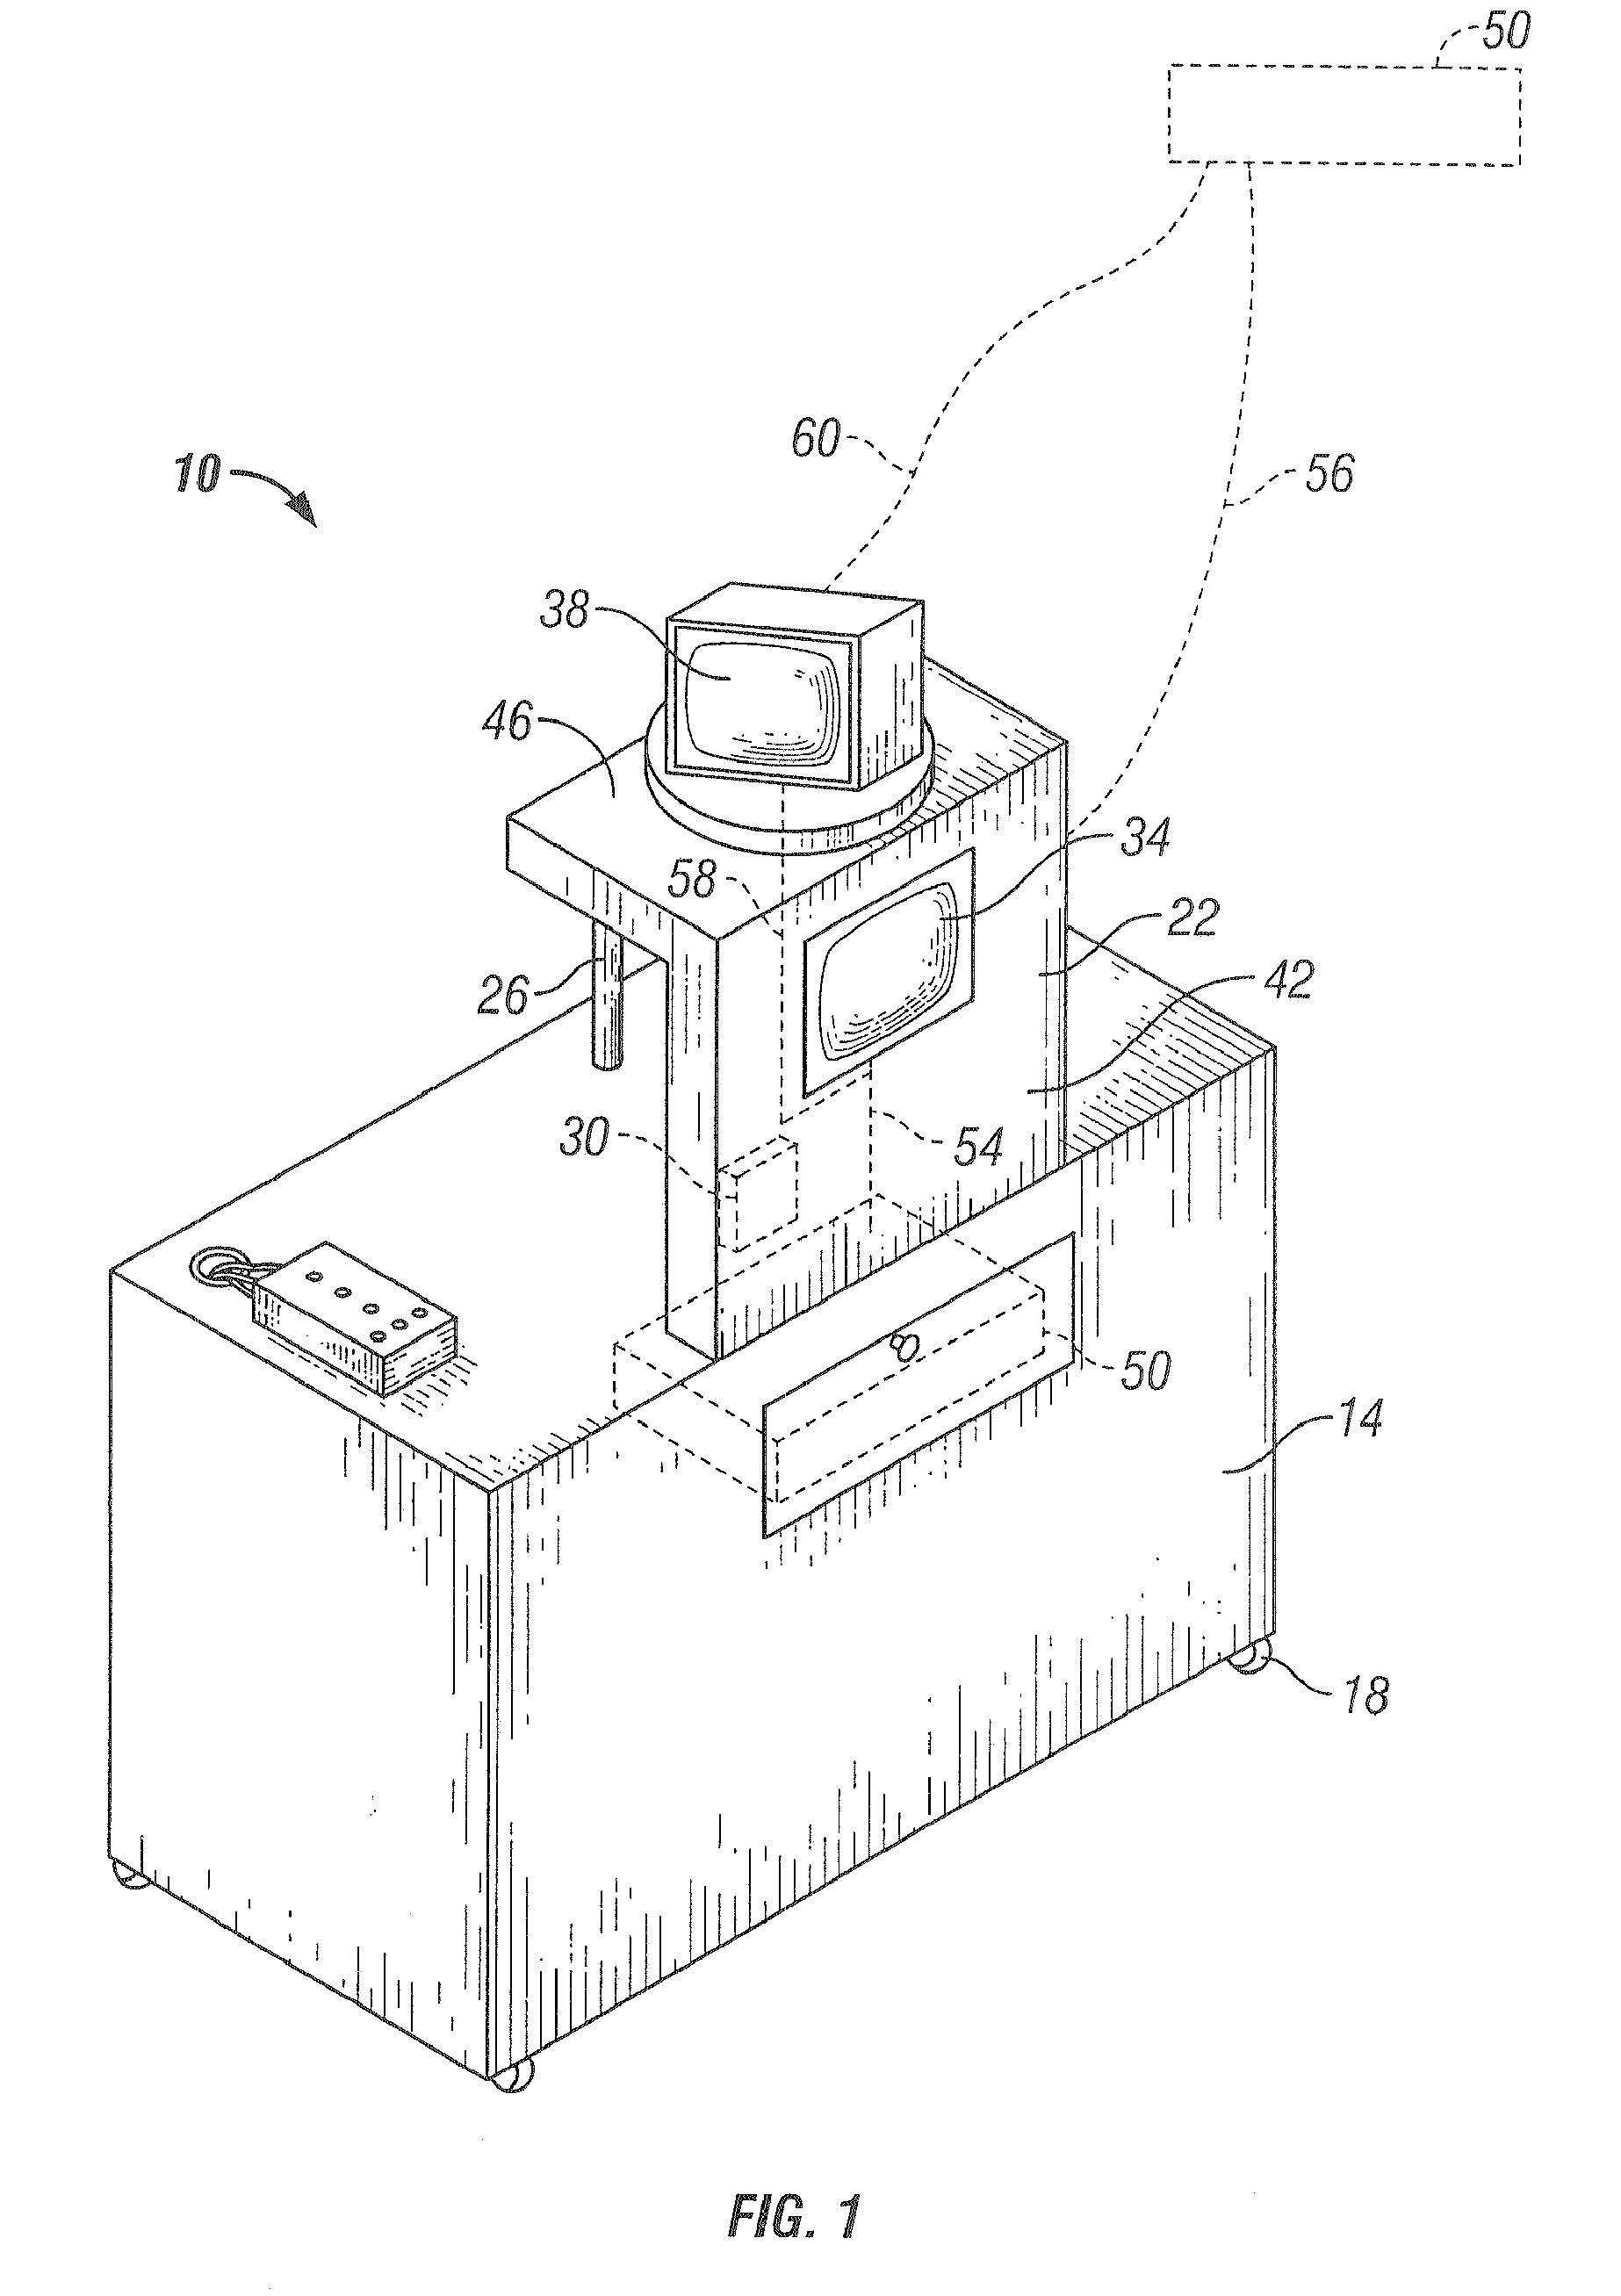 Method and apparatus for advertising adjacent to a beverage dispenser to facilitate advertising income device placement in high traffic venues